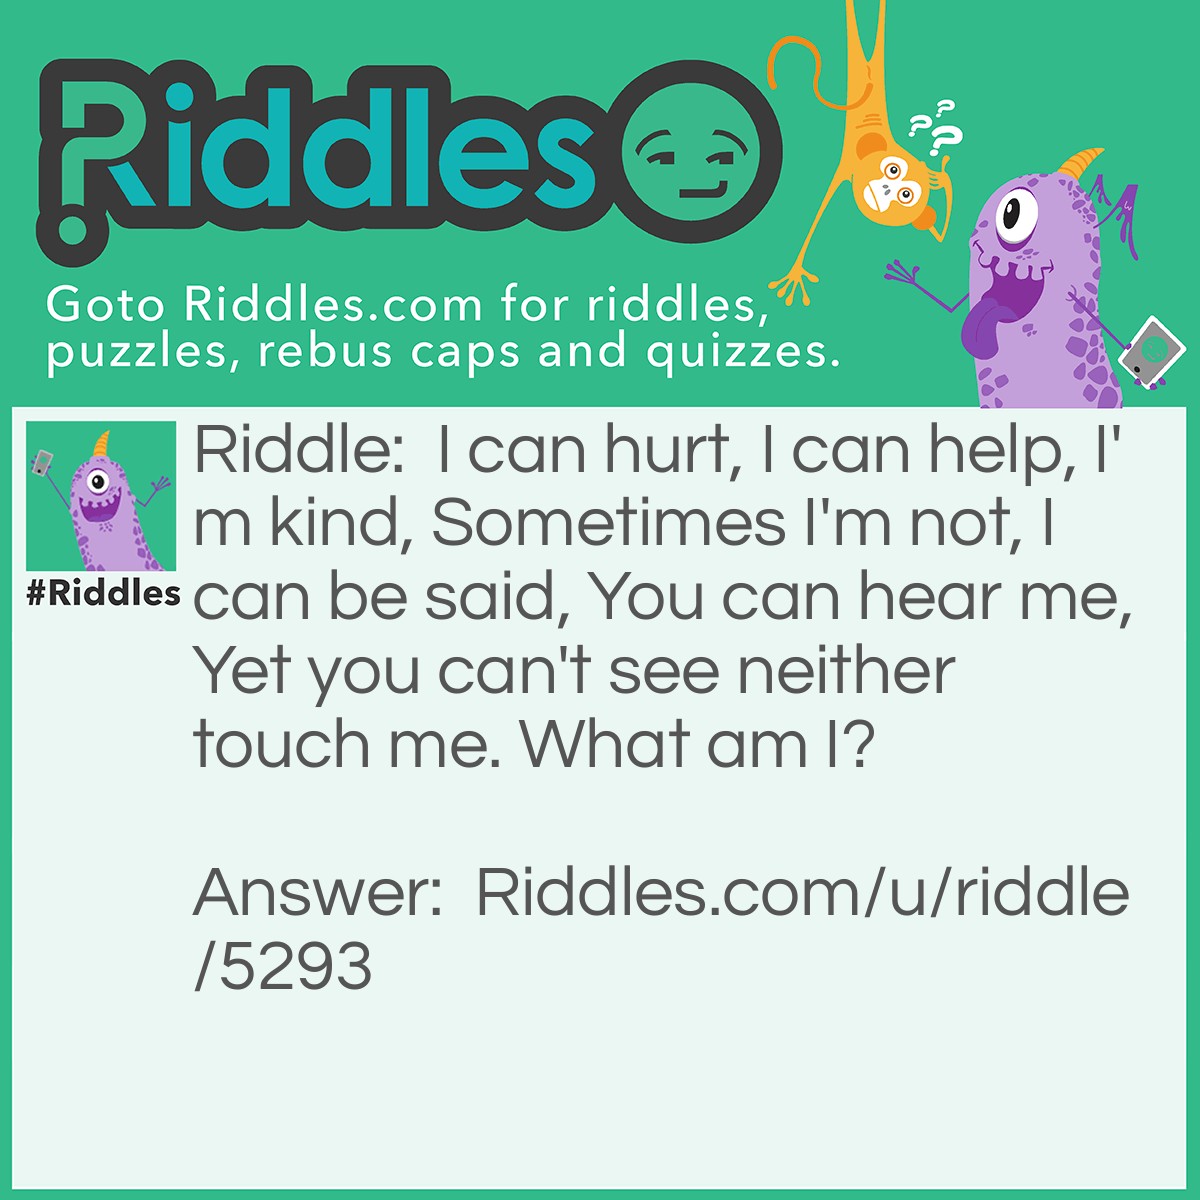 Riddle: I can hurt, I can help, I'm kind, Sometimes I'm not, I can be said, You can hear me, Yet you can't see neither touch me. What am I? Answer: Word(s).